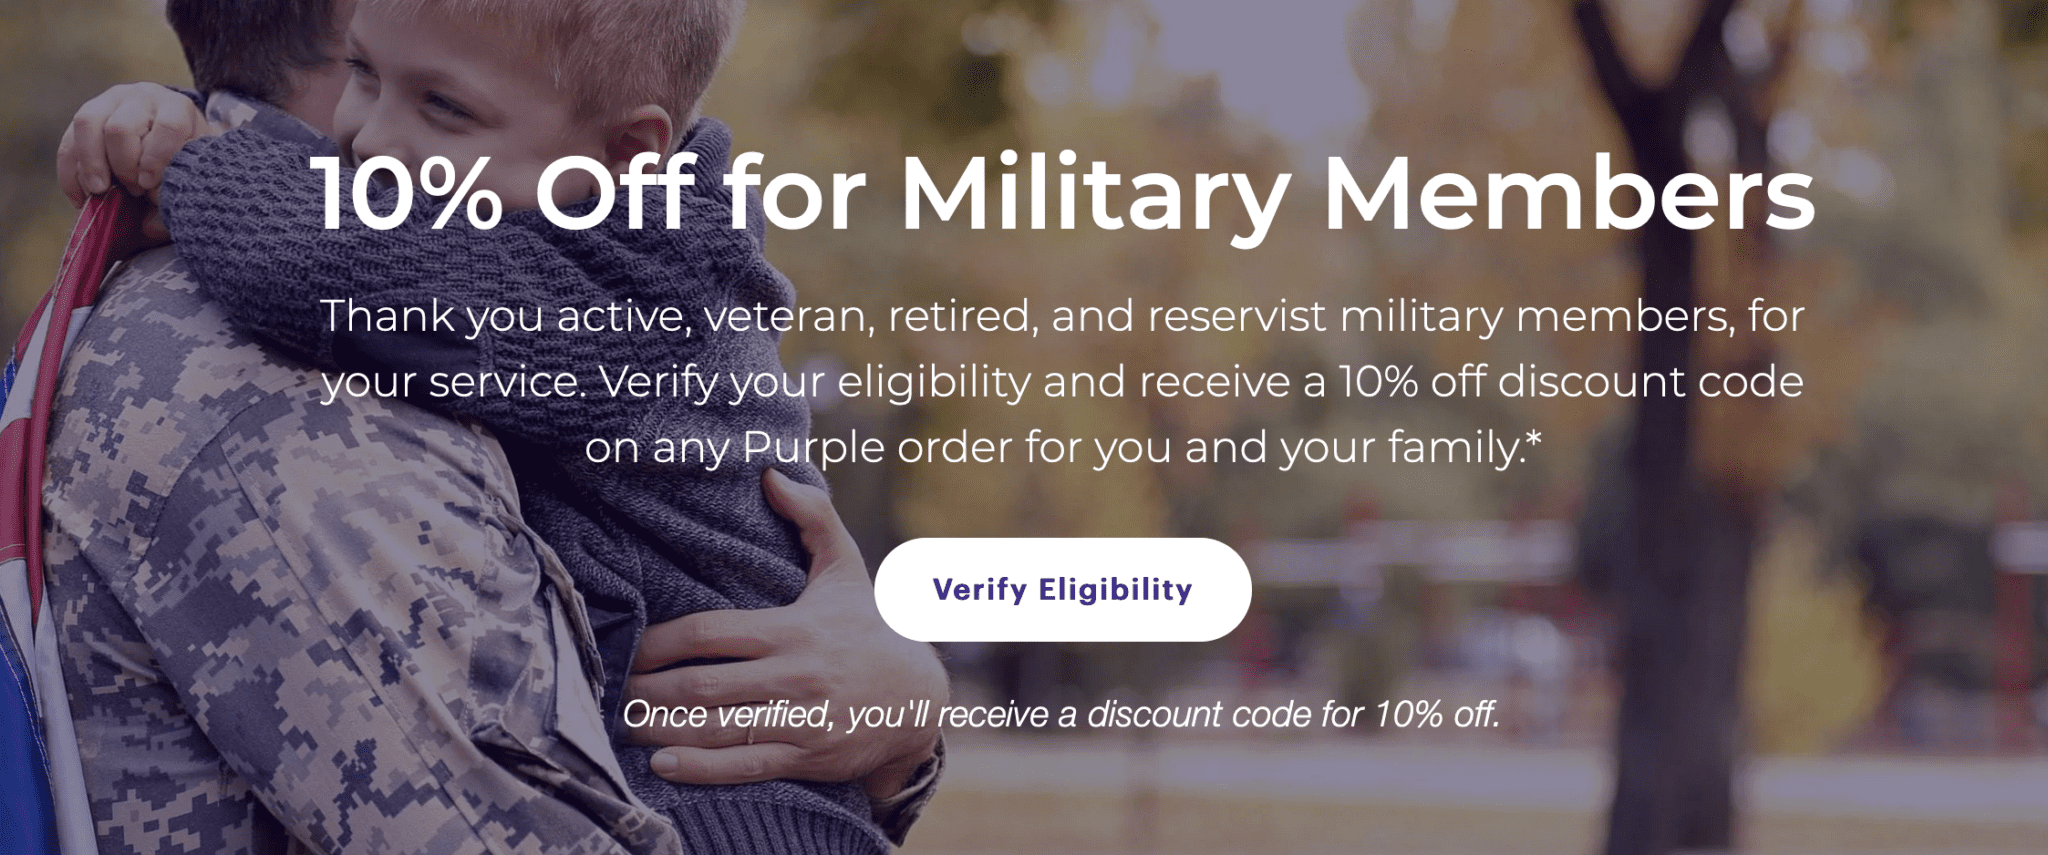 military discount for purple mattress